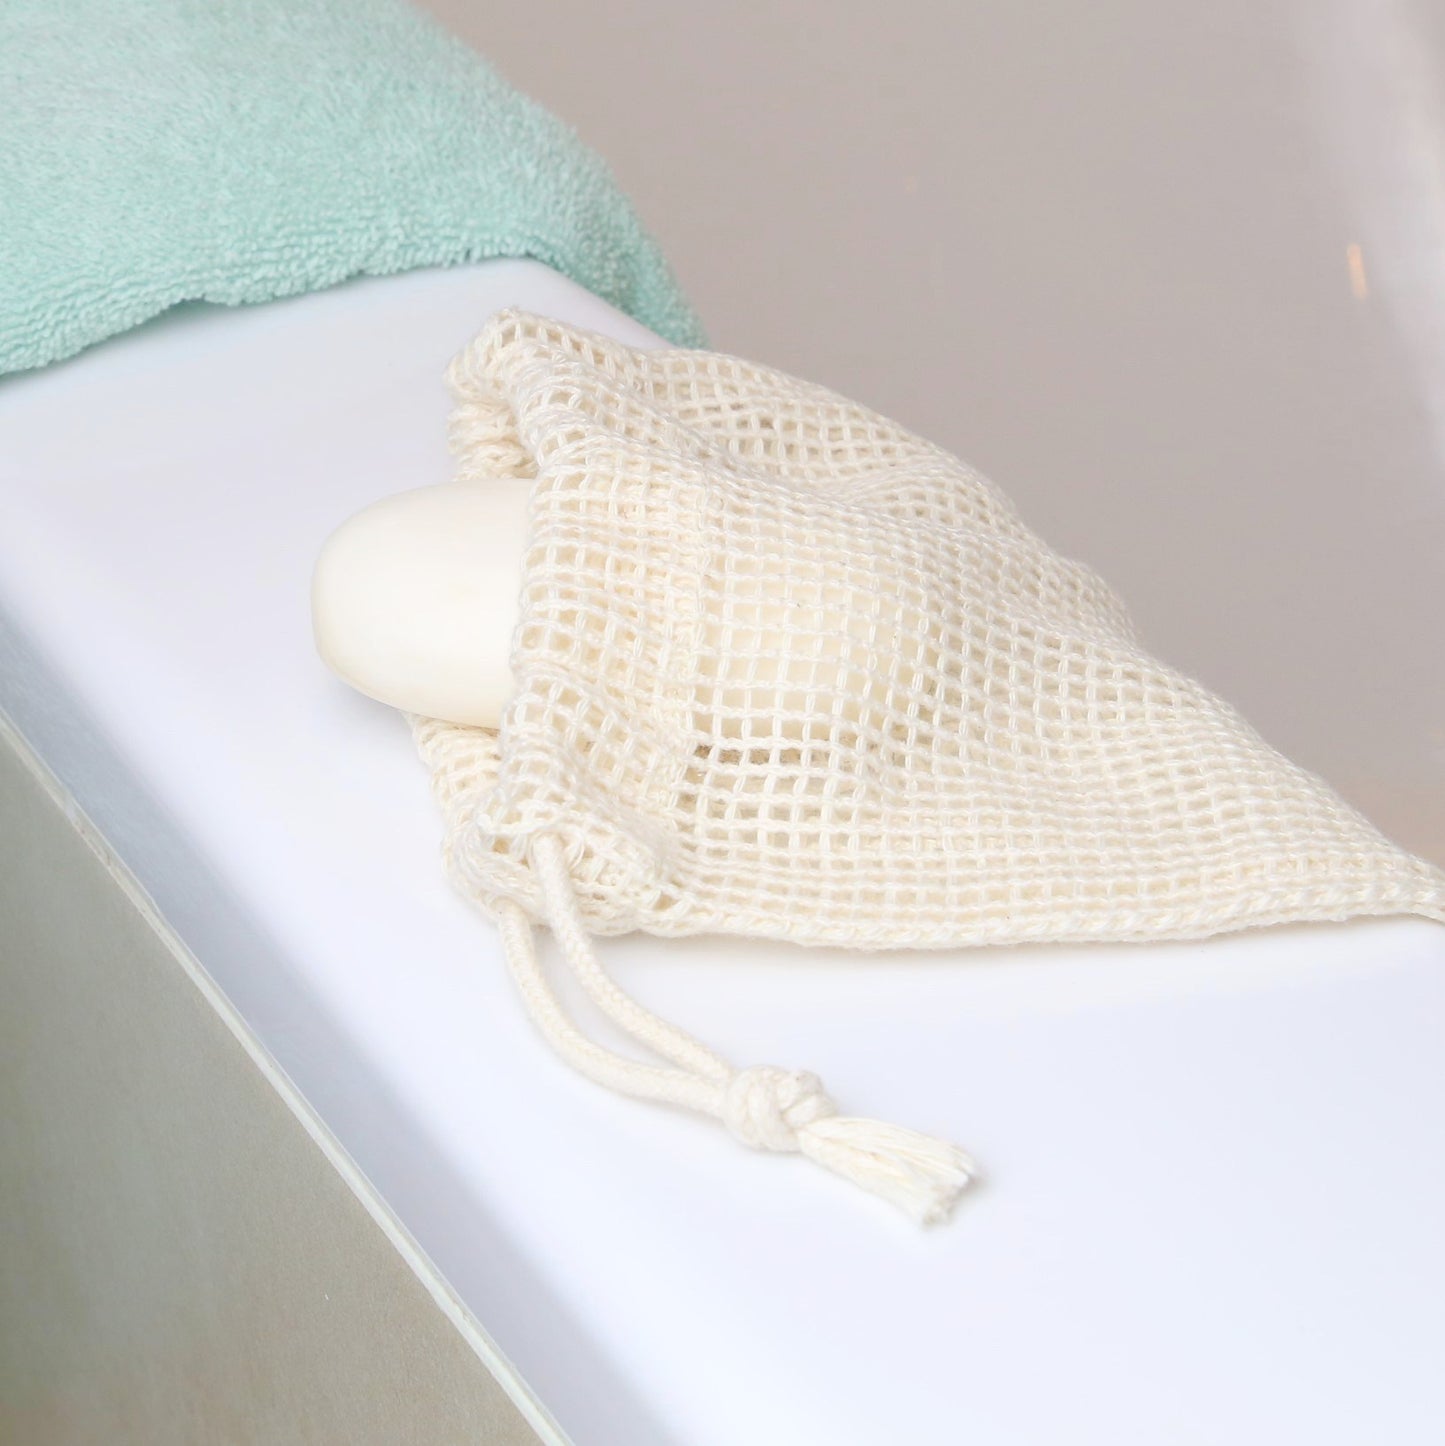 organic cotton mesh bag on the bath with soap inside